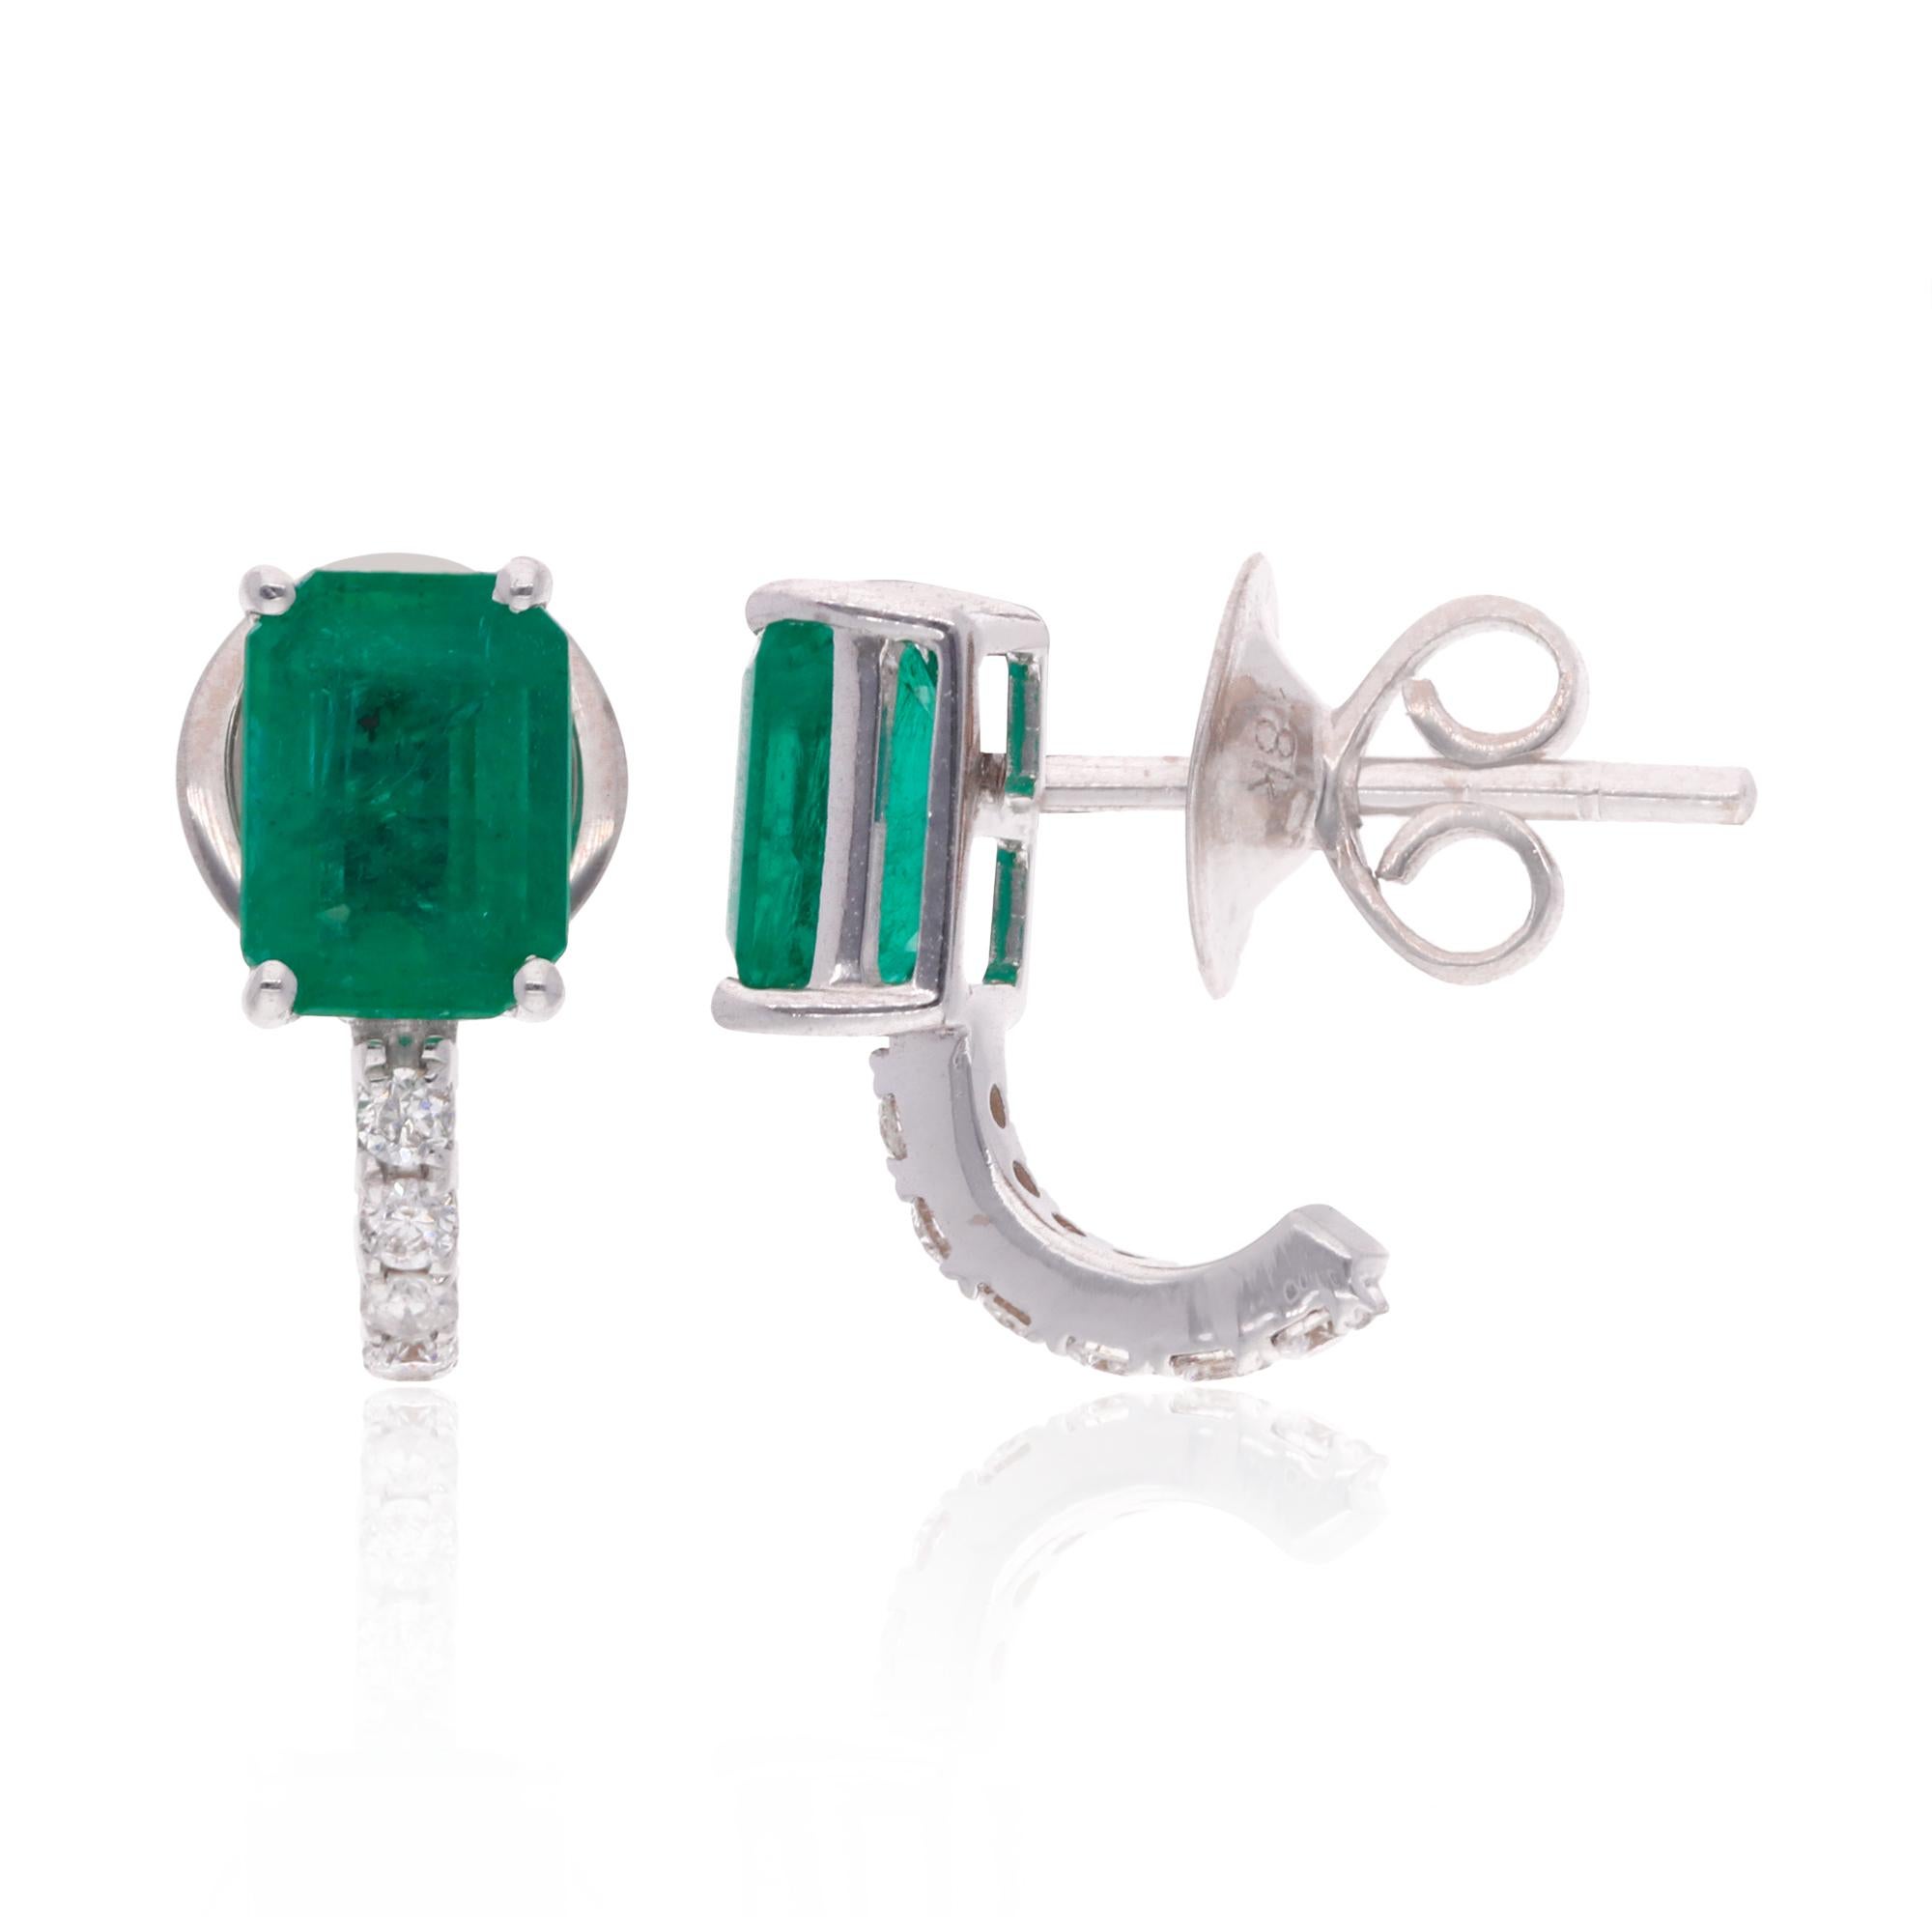 Item Code :- SEE-11450B
Gross Wt. :- 2.67 gm
18k Solid White Gold Wt. :- 2.26 gm
Natural Diamond Wt. :- 0.20 ct. ( AVERAGE DIAMOND CLARITY SI1-SI2 & COLOR H-I )
Emerald Wt. :- 1.86 ct.
Earrings Size :- 12 mm approx.

✦ Import Duties, Taxes and